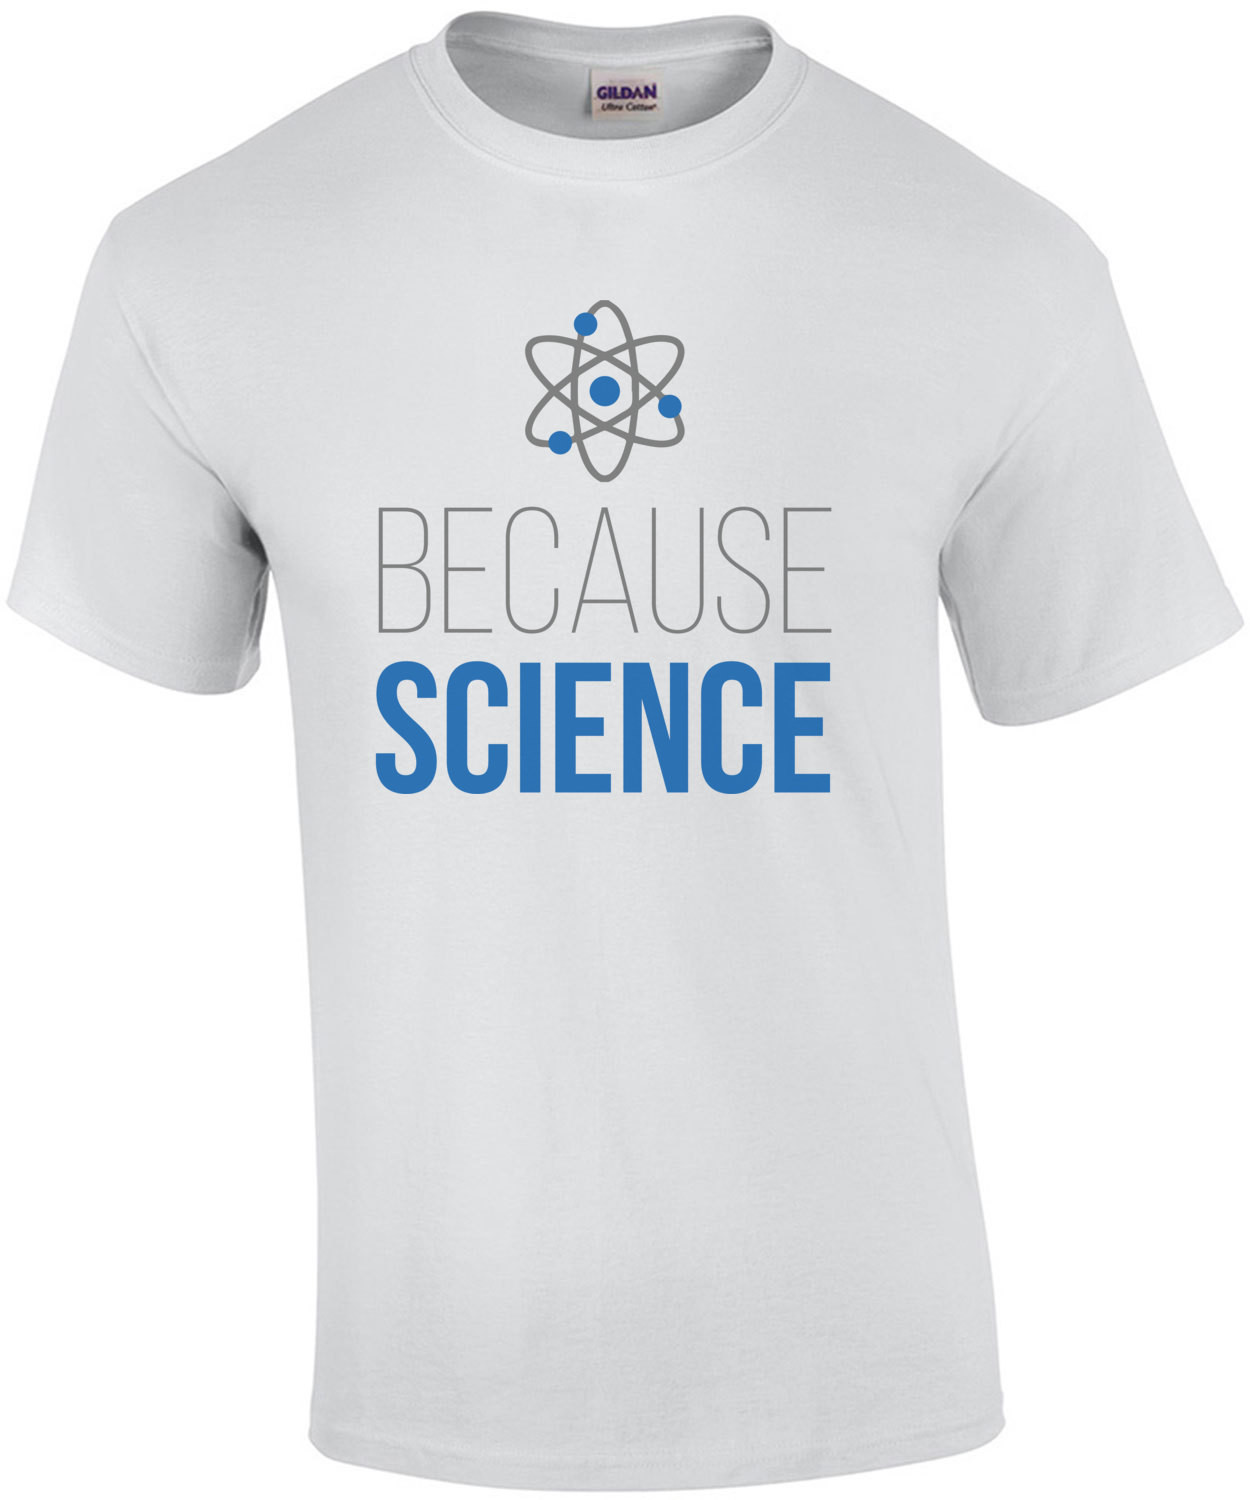 Because Science - Funny Science T-Shirt